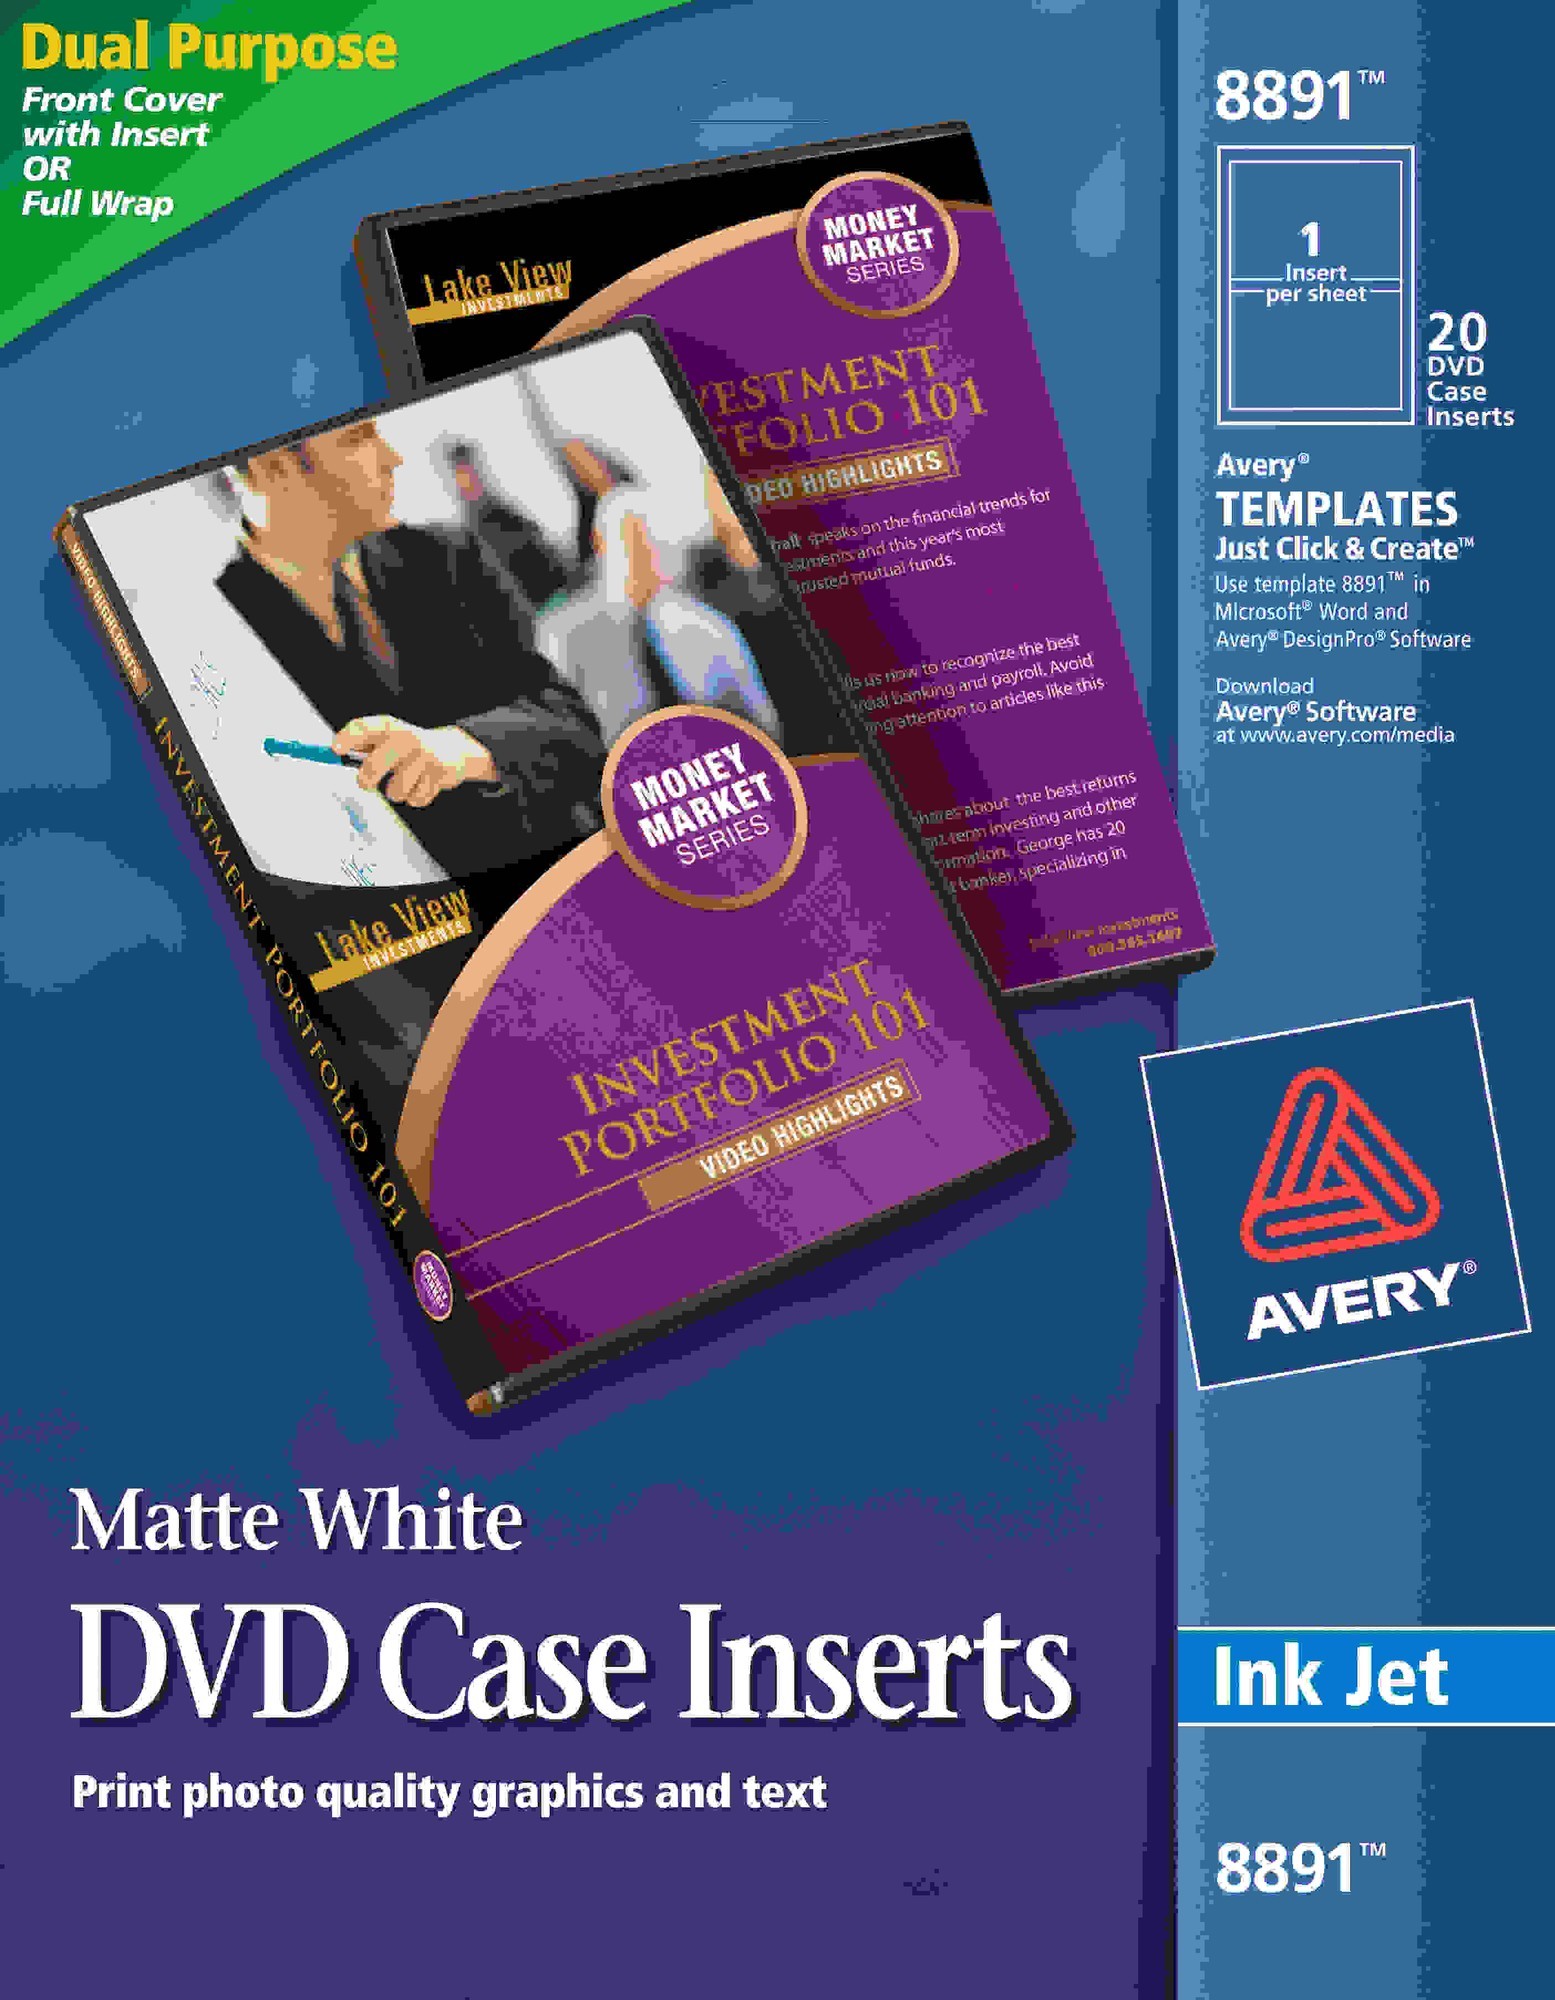 Avery® Avery Matte White DVD Case Inserts, 20 Inserts (8891) - Matte - 20 / Pack - Acid-free, Moisture Resistant, Water R